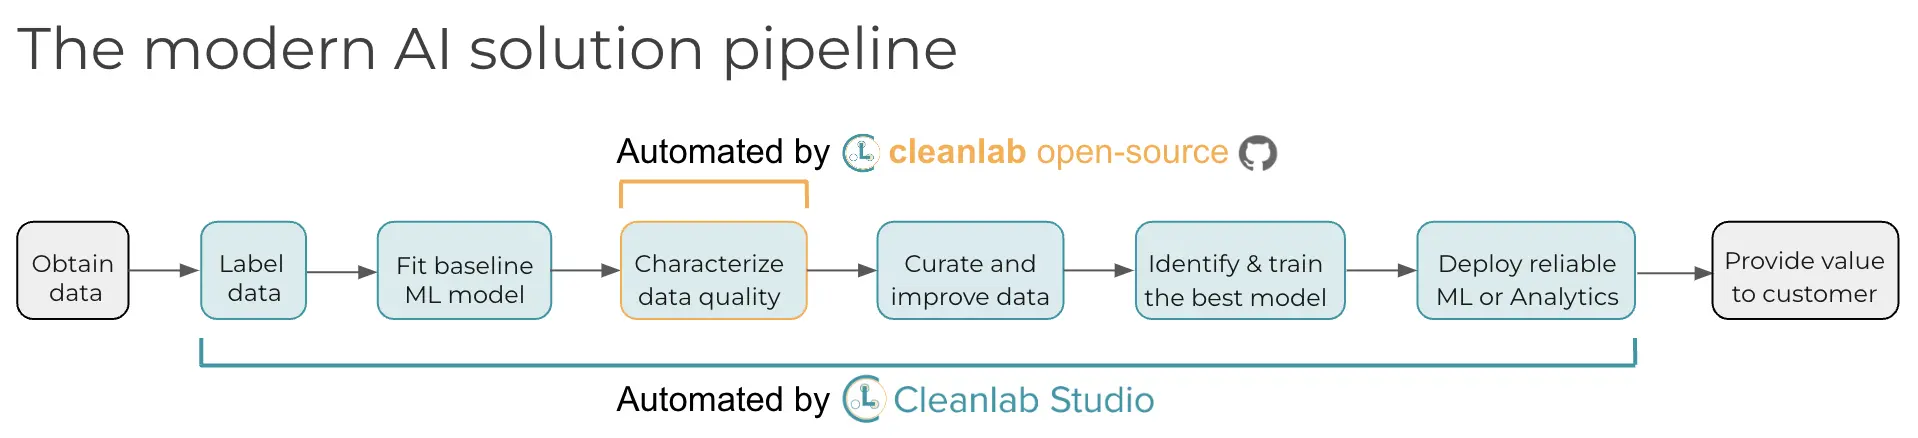 Stages of modern AI pipeline that can now be automated with Cleanlab Studio